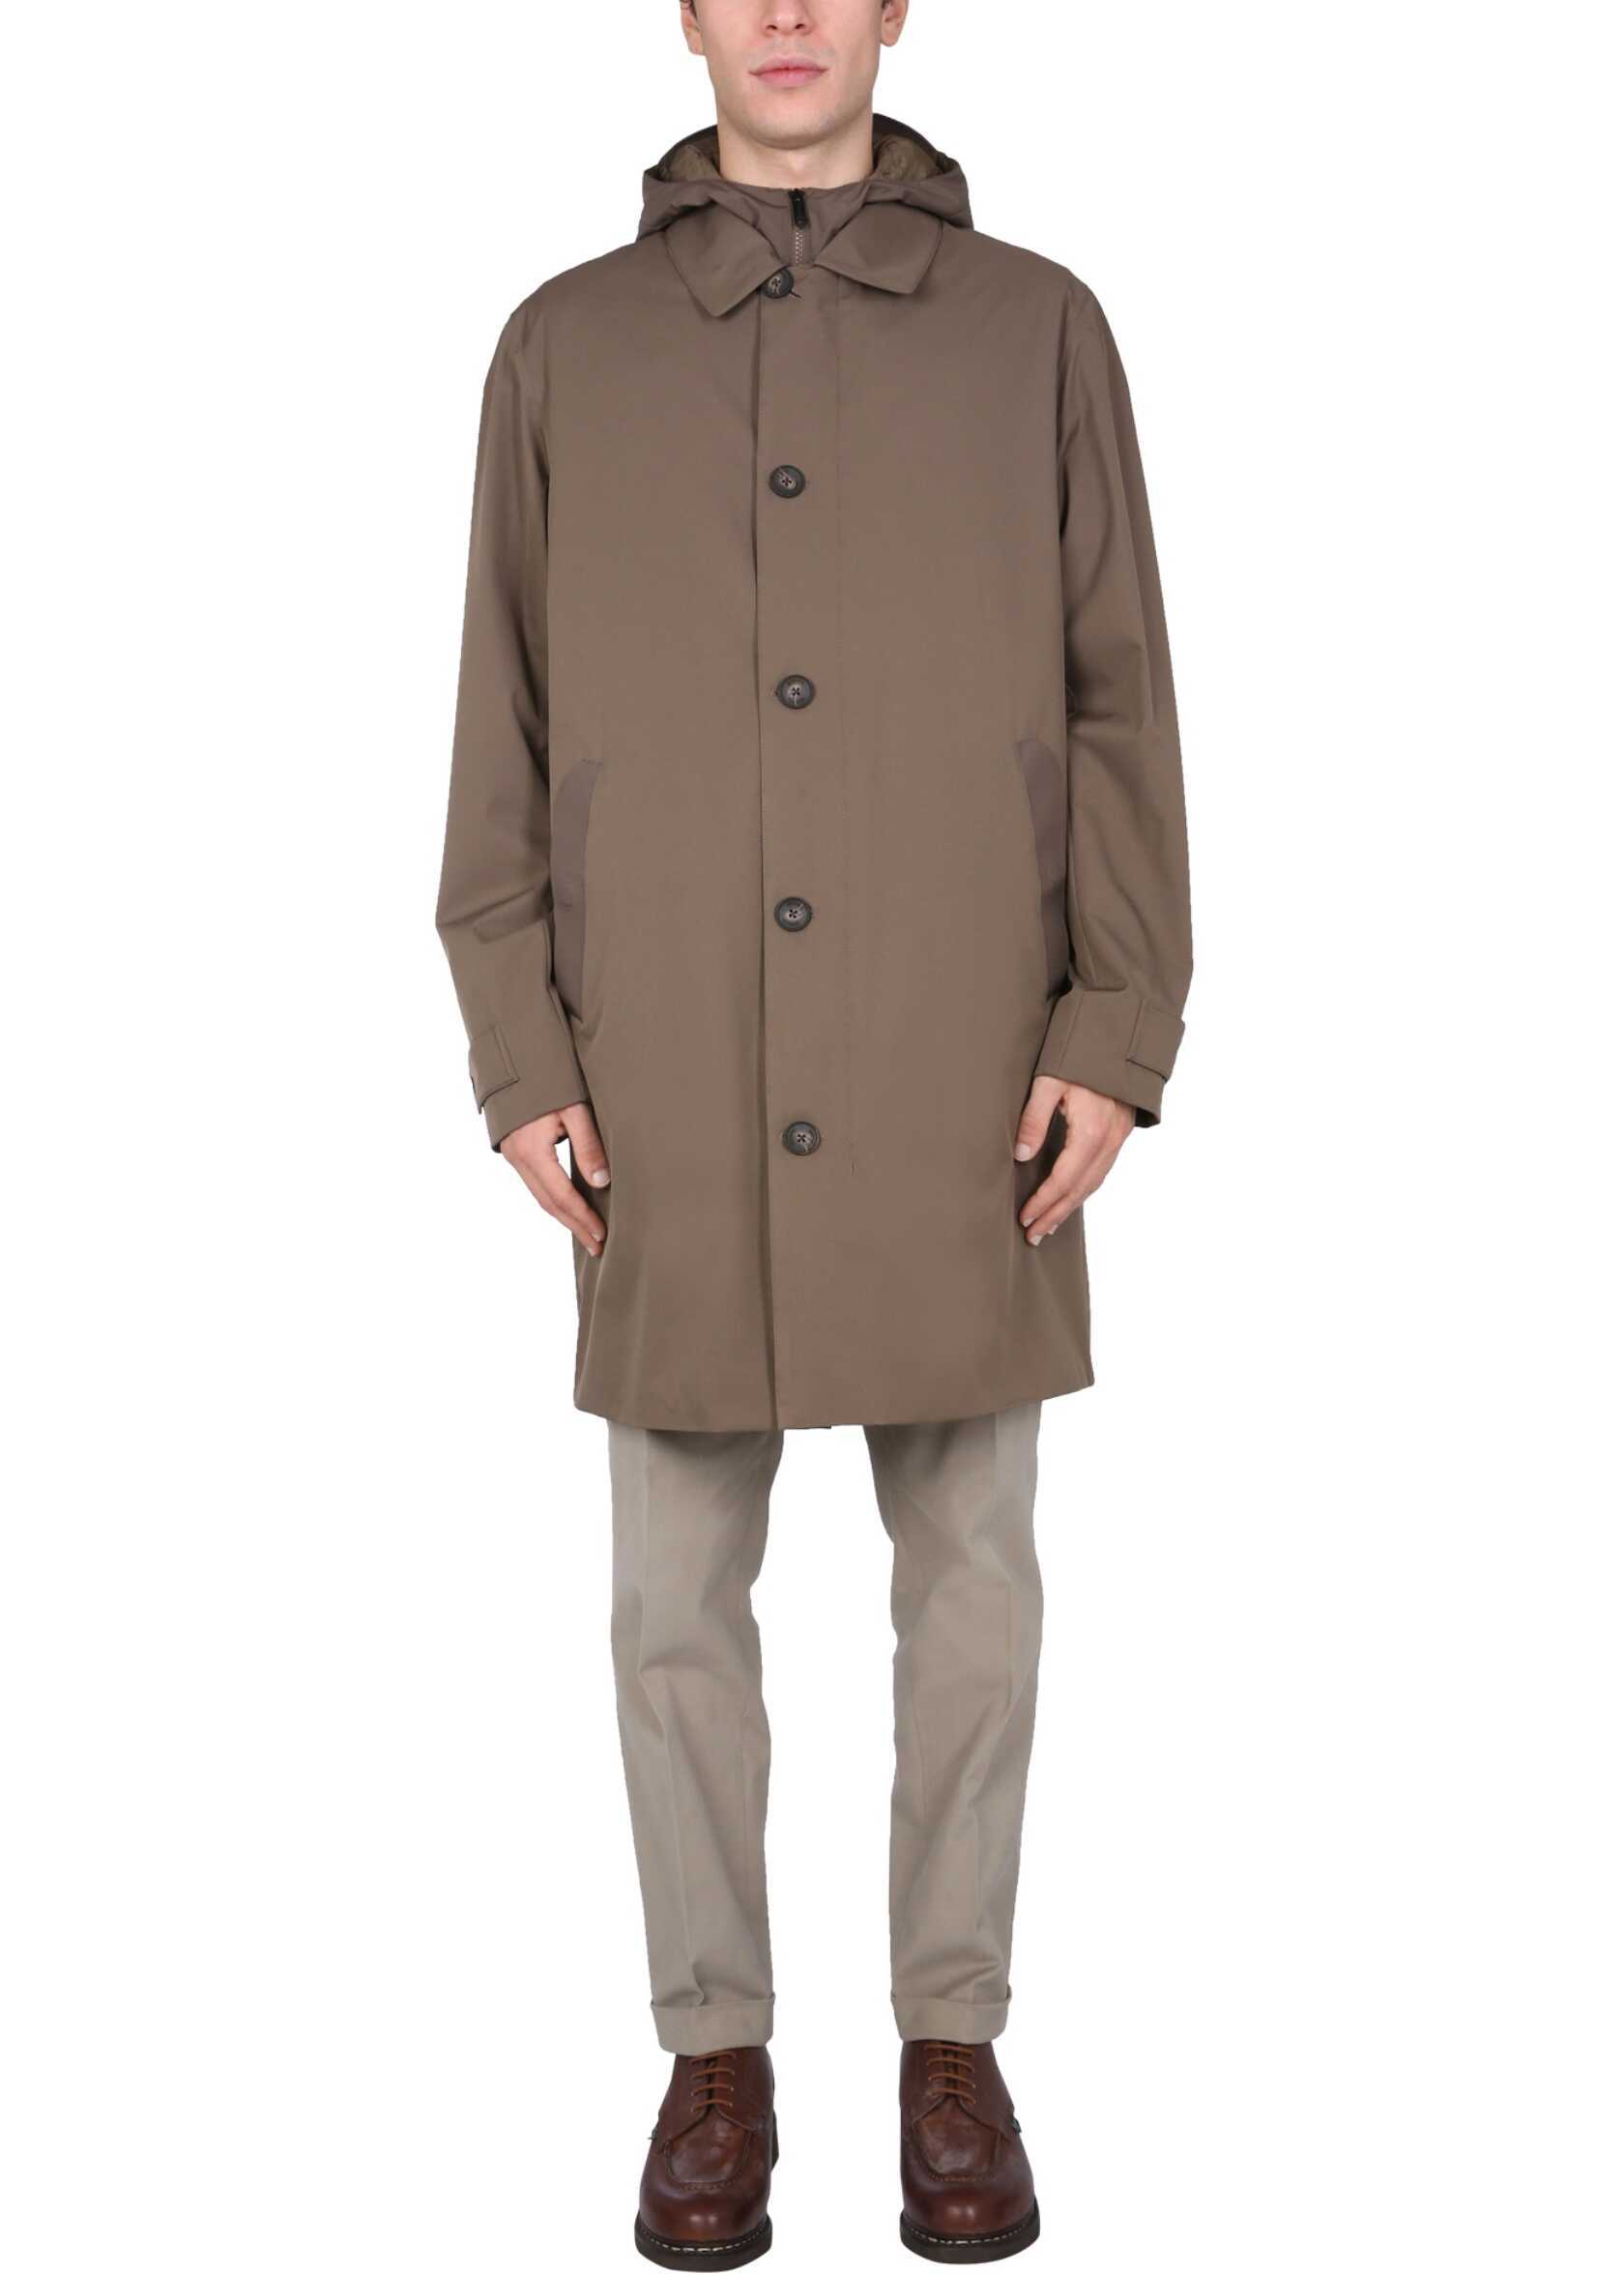 Z Zegna Trench With Inner Down Jacket BROWN image0